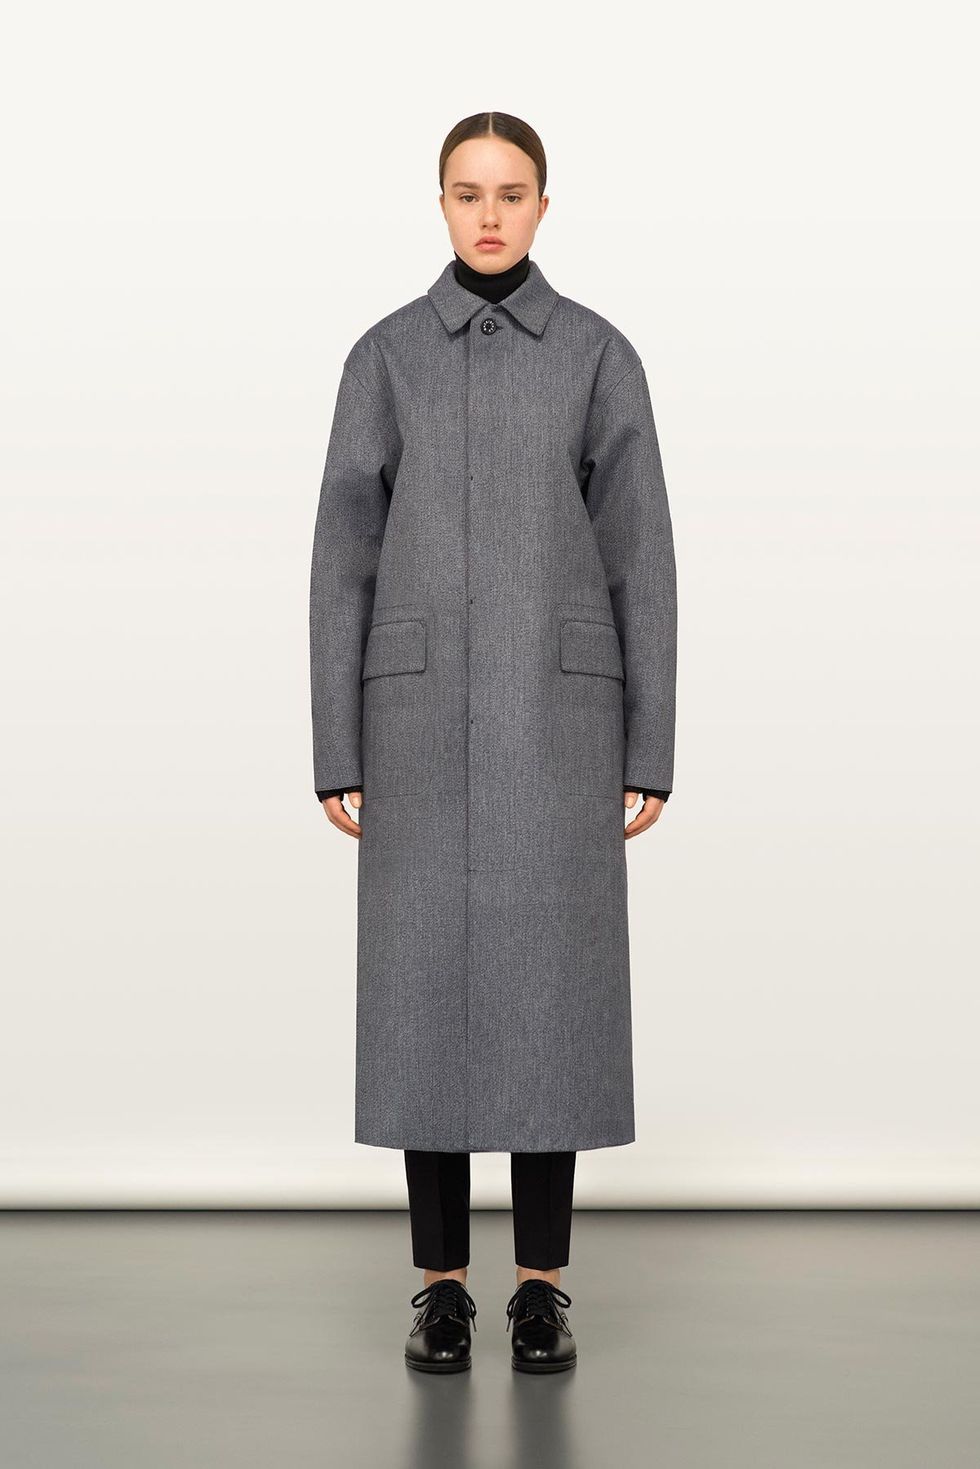 Sleeve, Shoulder, Textile, Collar, Joint, Outerwear, Standing, Coat, Style, Overcoat, 